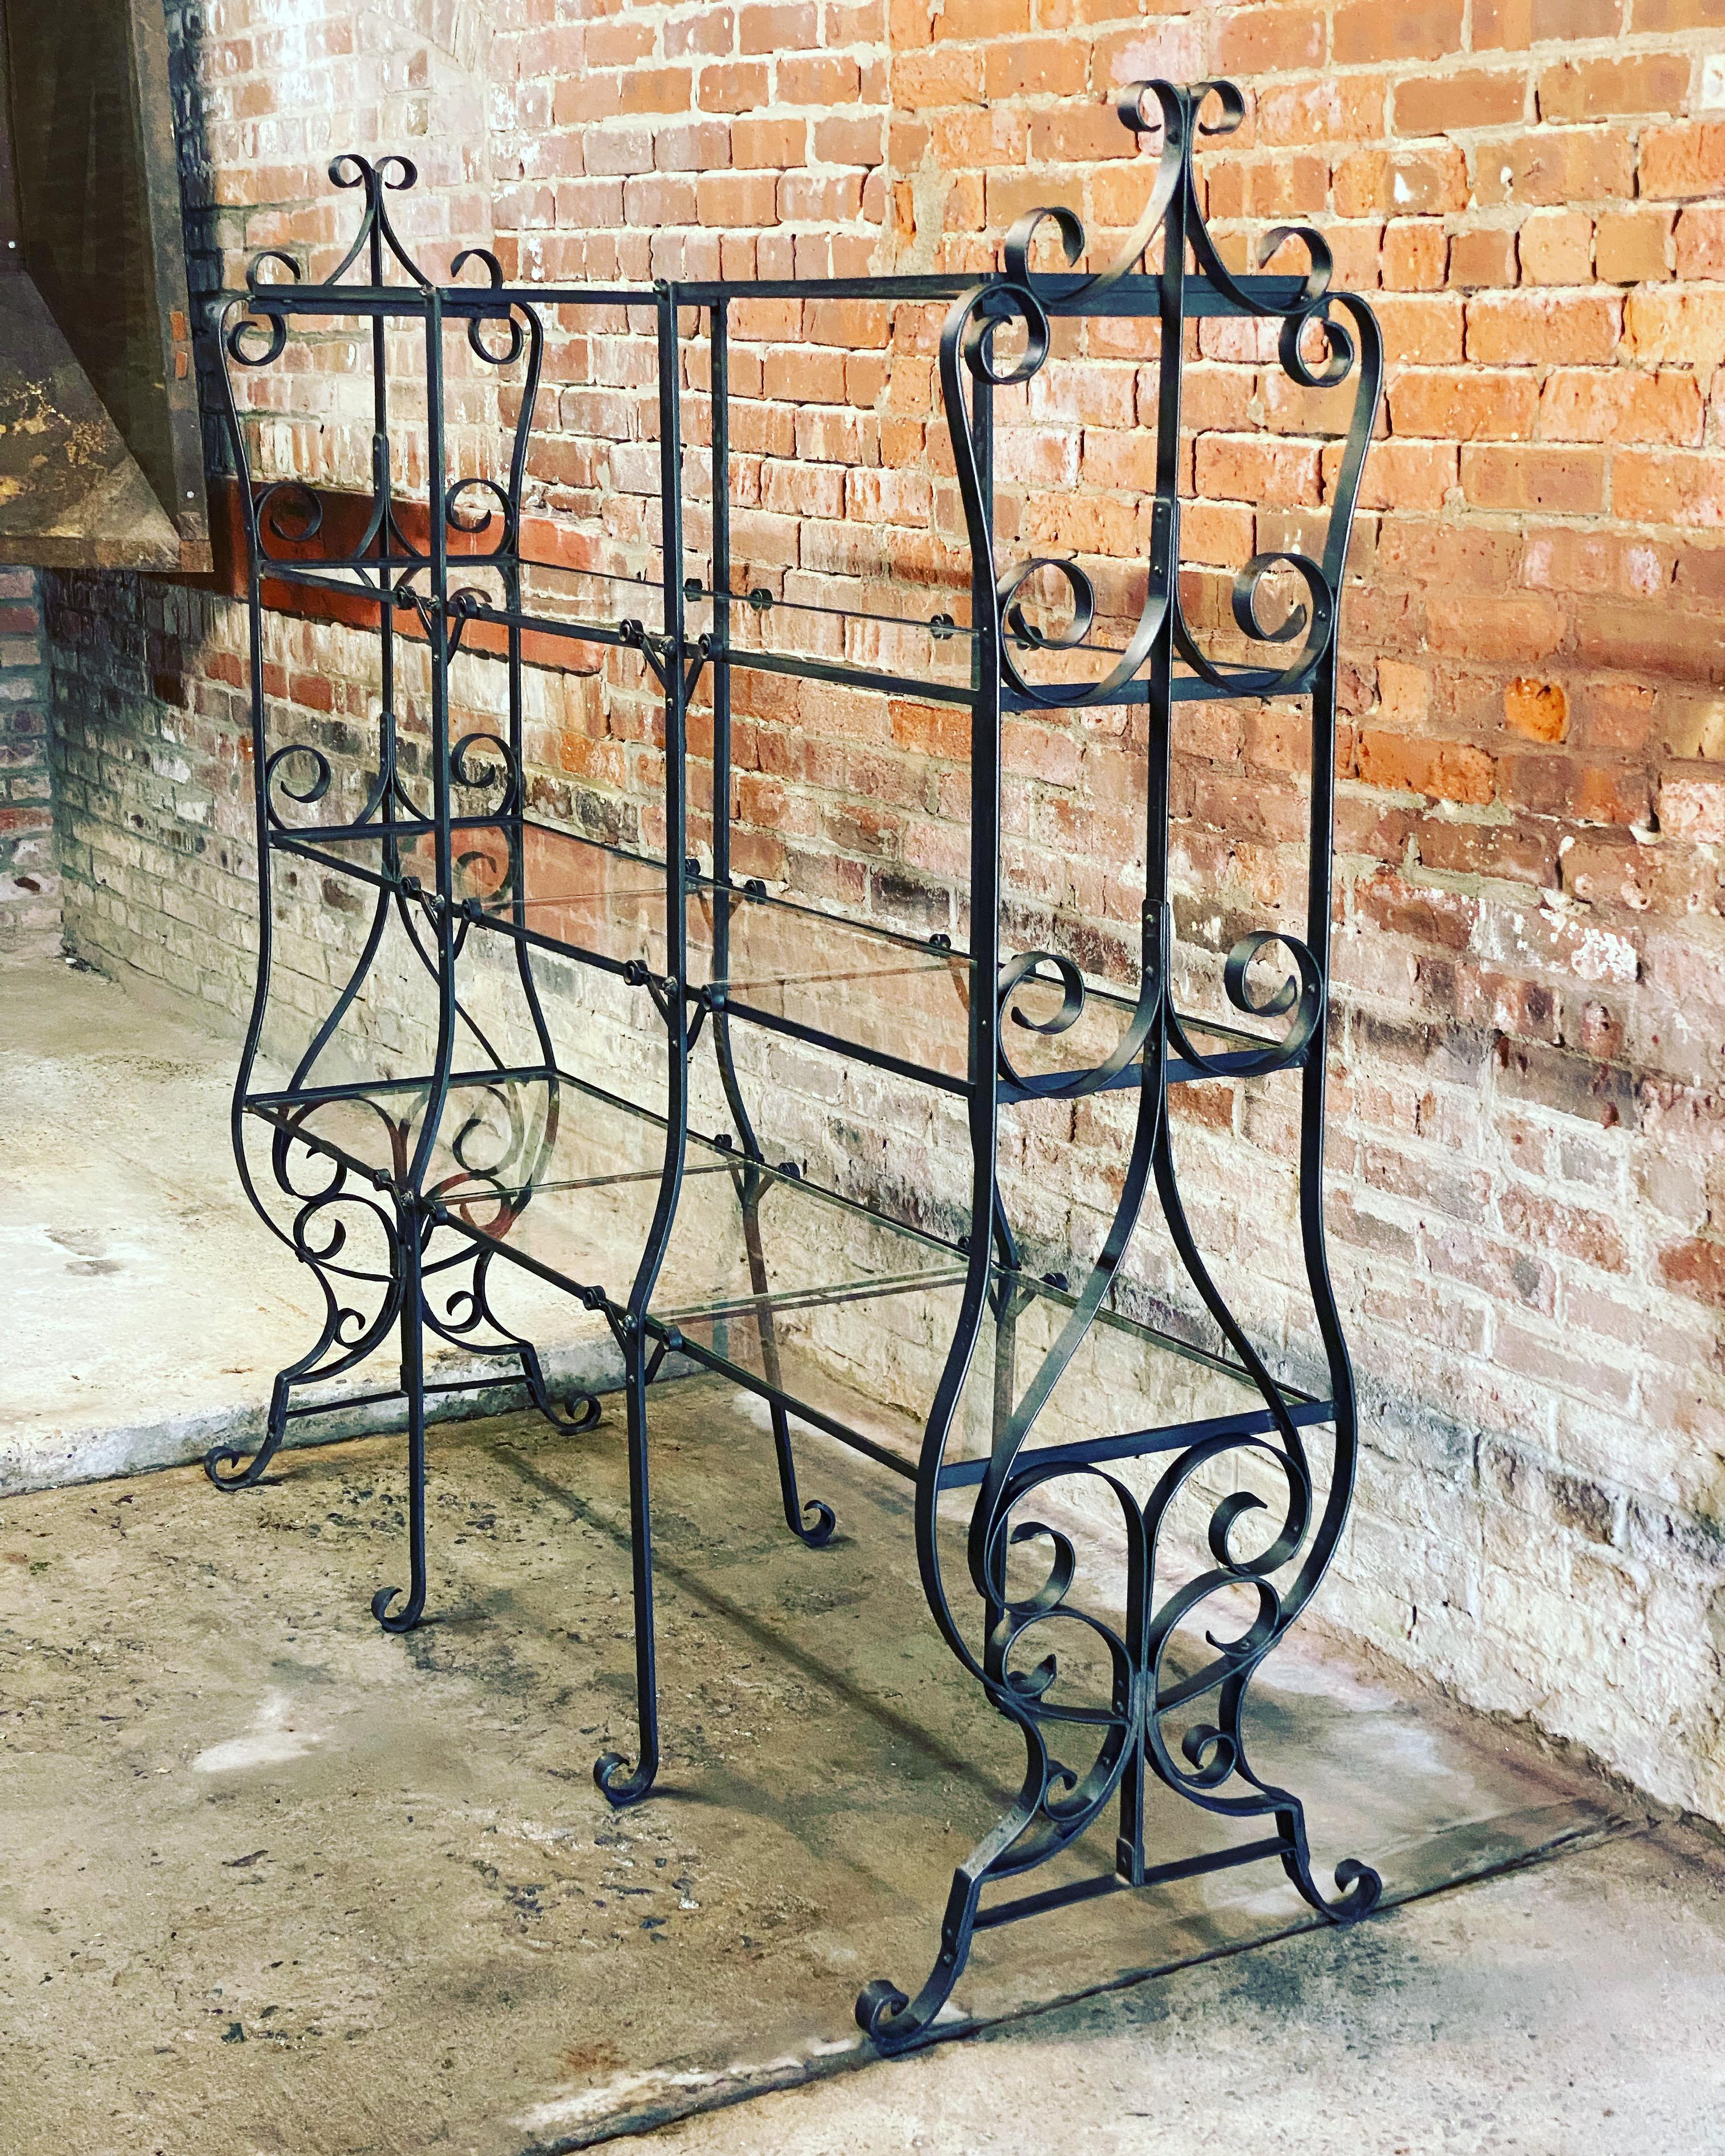 Impressive French Art Nouveau wrought iron and glass shelves etagere. This is an old  French department store display showcase. Imagine French housewares, ceramics, perfumes, plants or baked goods showcased on this beautiful shelf. Circa 1880-1900.